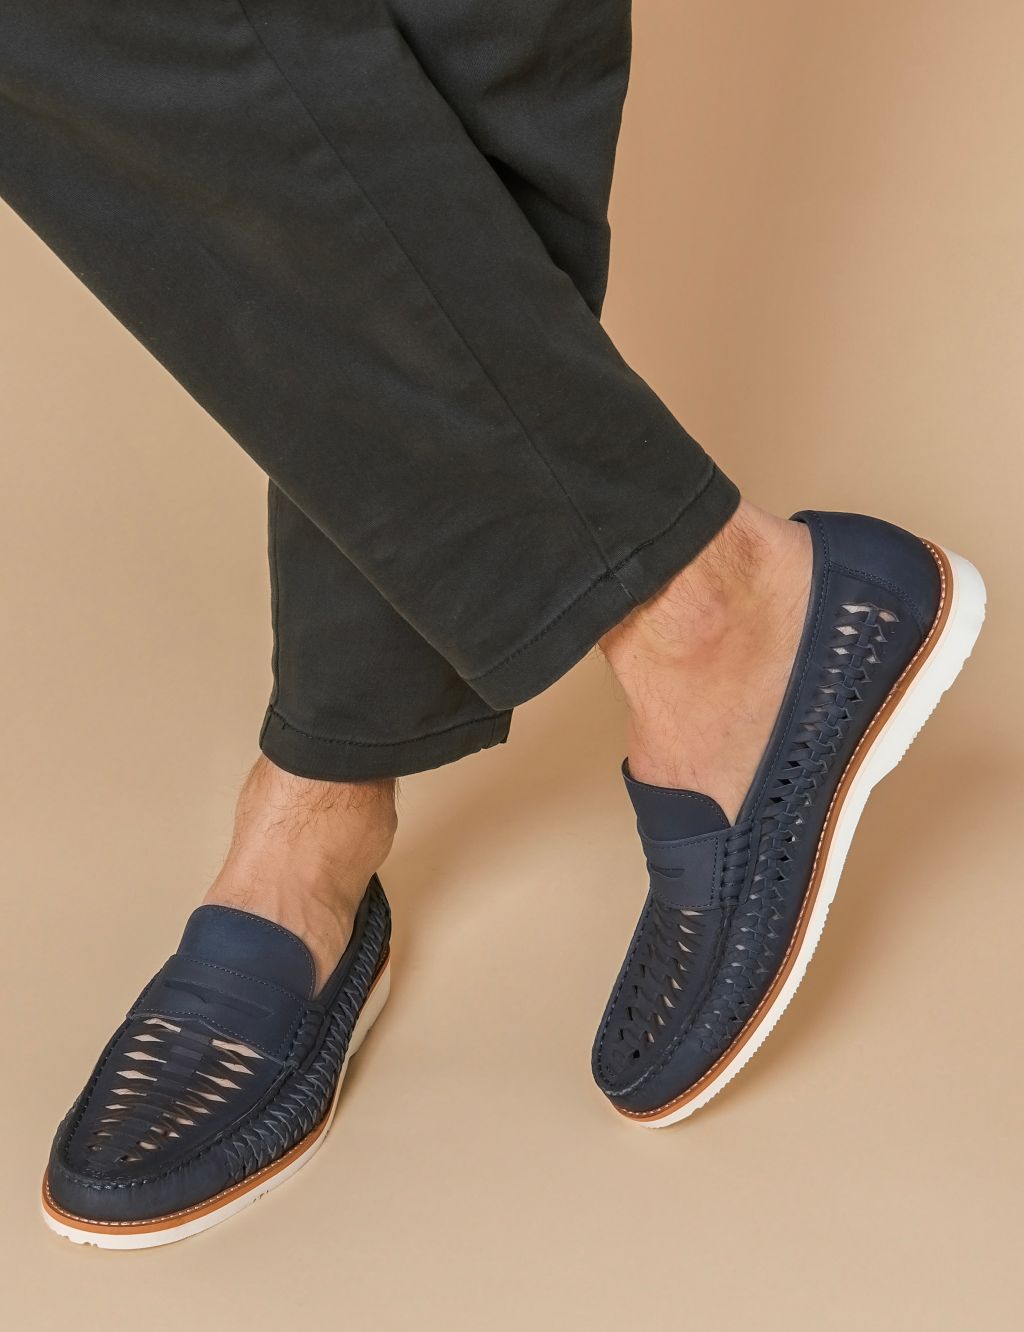 Leather Slip-On Loafers